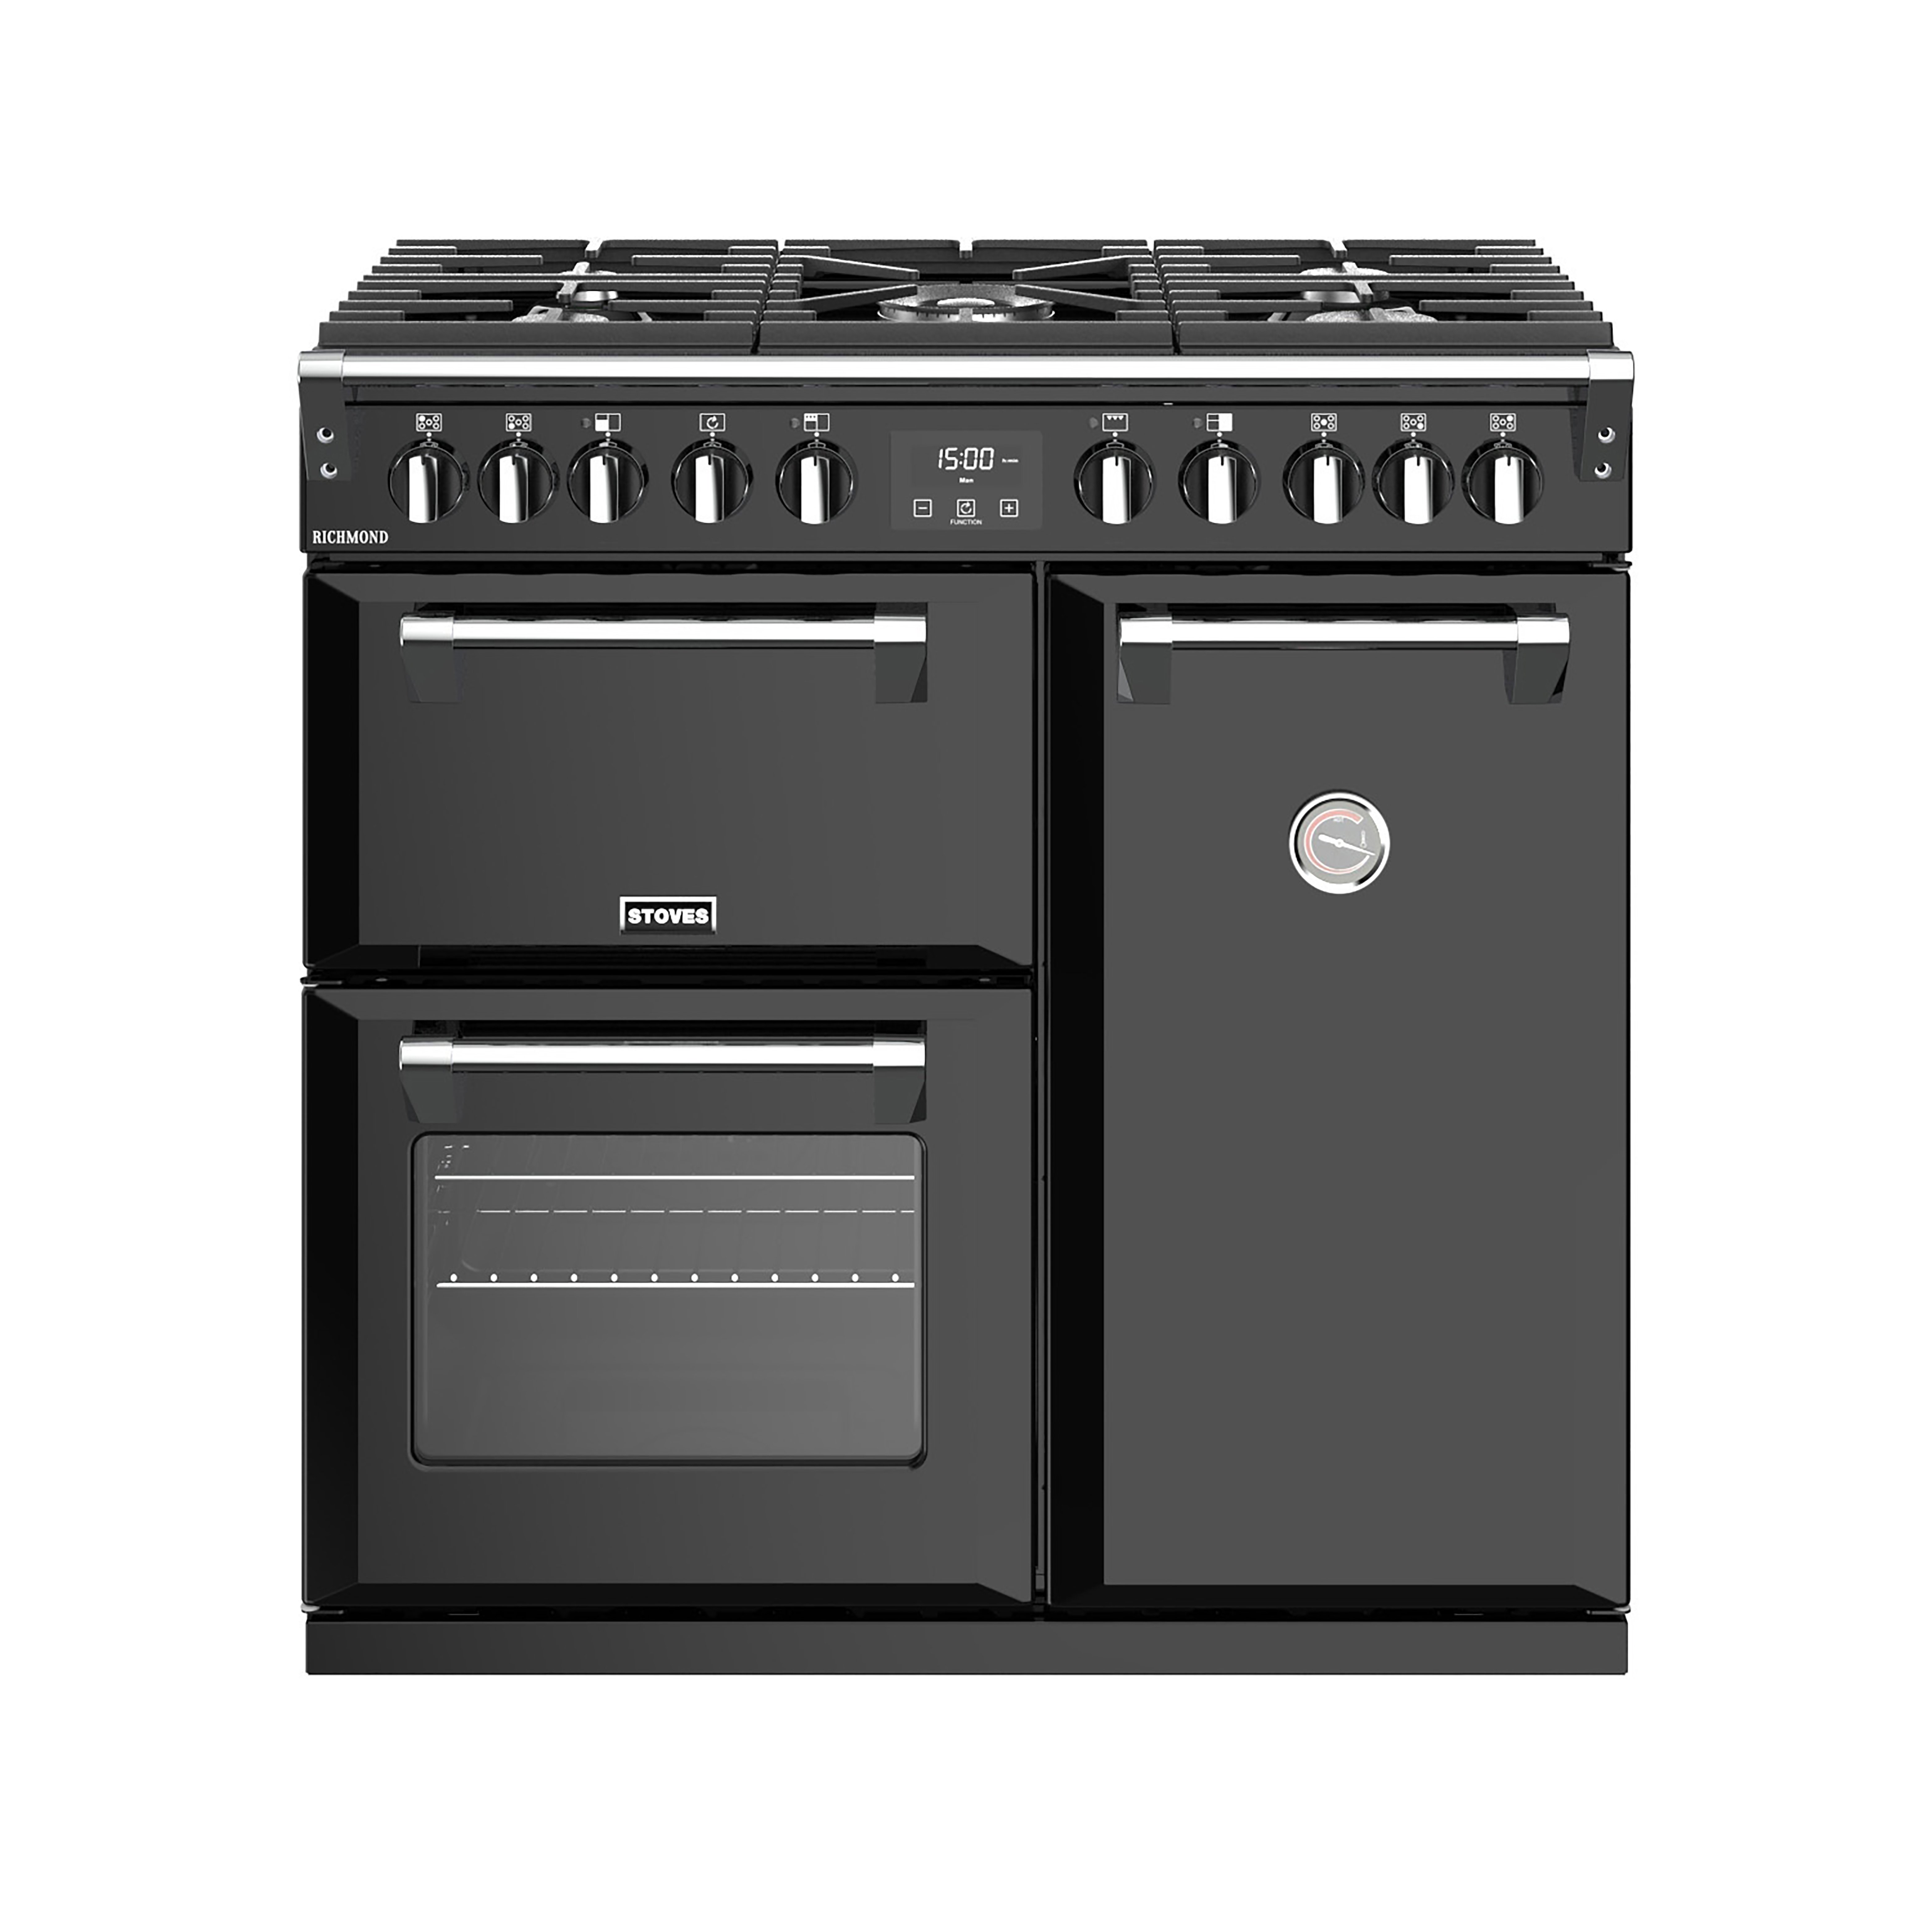 90cm Dual Fuel Range Cooker With A 5 Burner Gas Hob, Conventional Oven & Grill, Multifunction Main Oven And Tall Fanned Oven